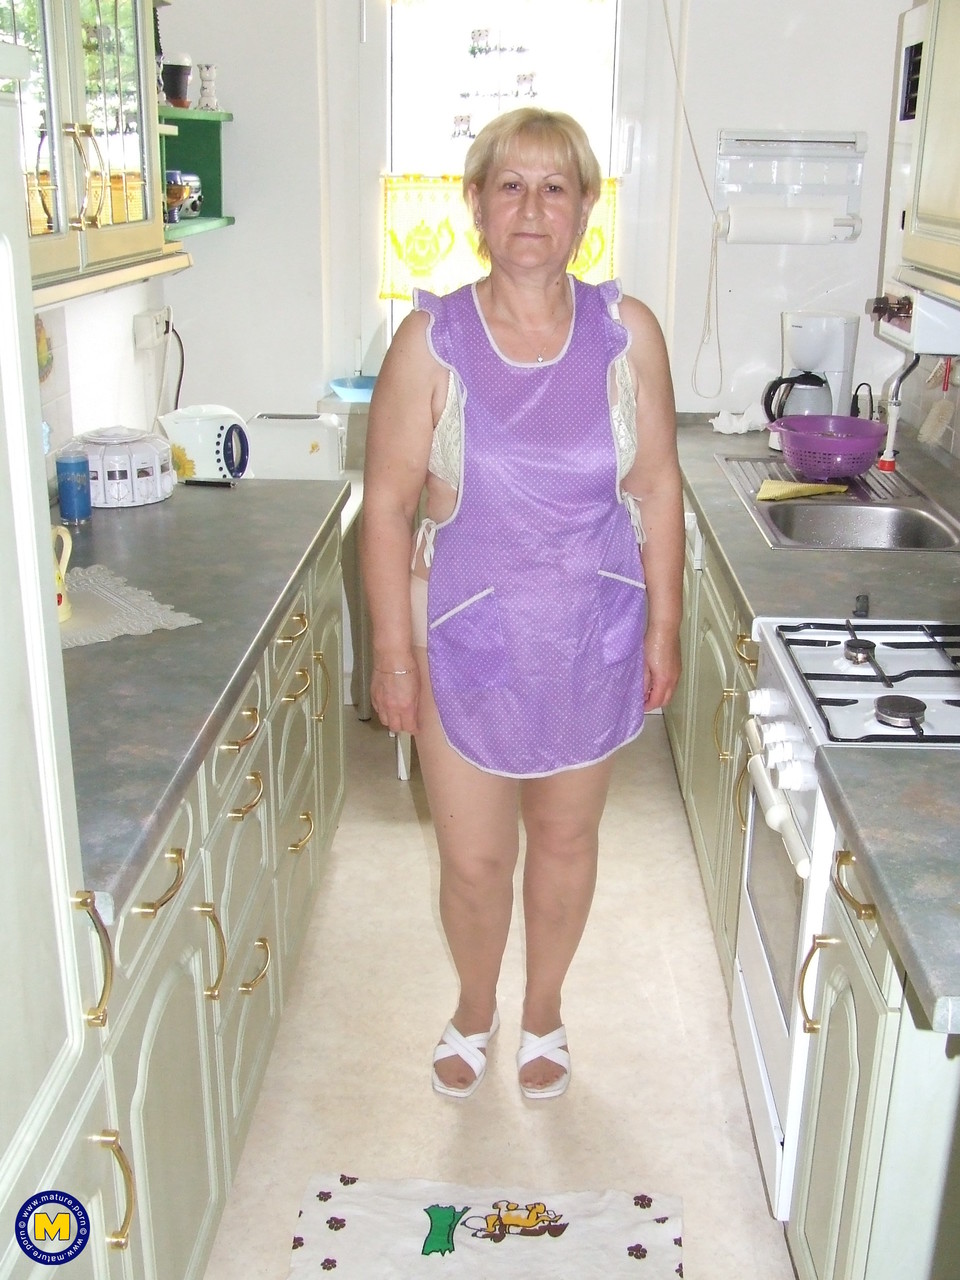 Short haired German cleaning lady Dagmar shows her mature cunt in the kitchen photo porno #425226956 | Mature NL Pics, Dagmar, German, porno mobile